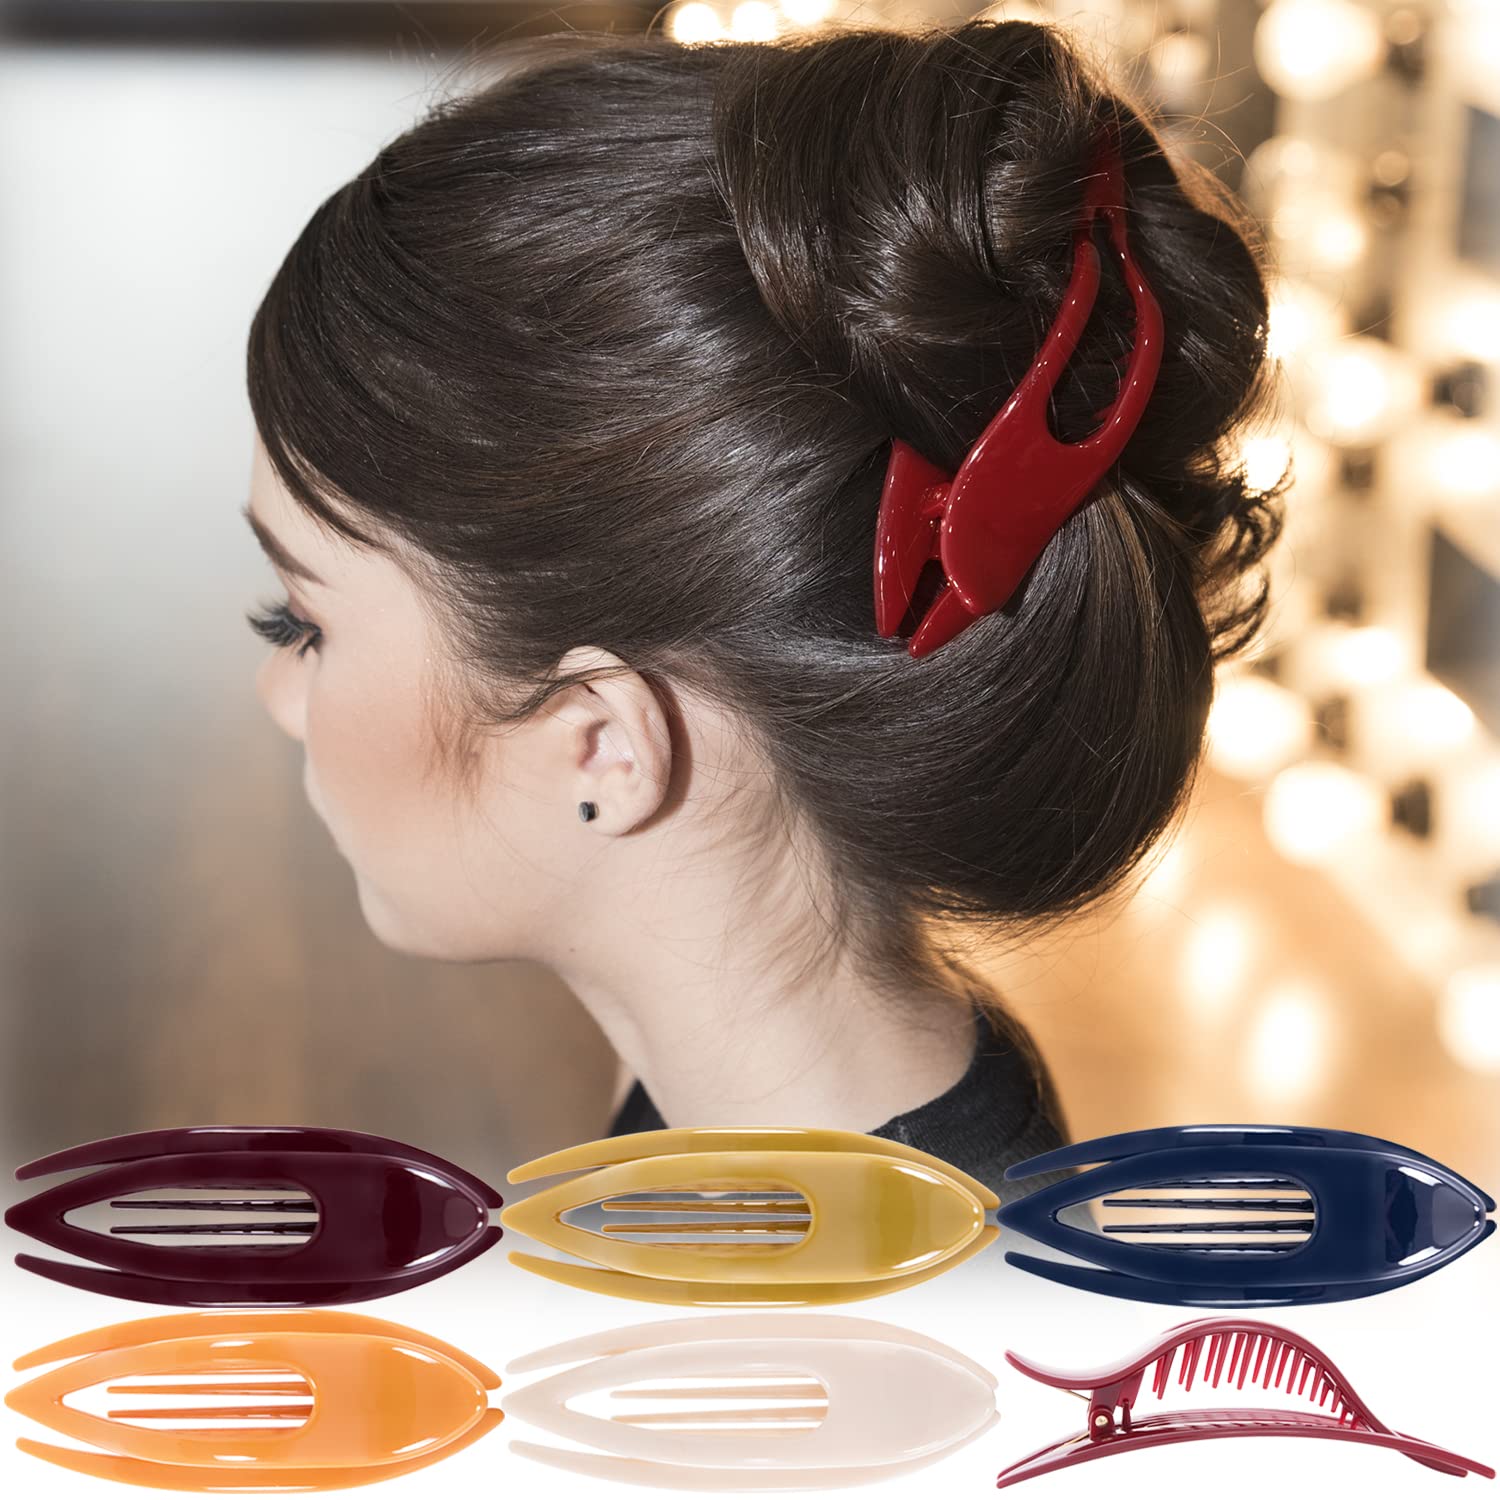 Stylish Womens Hair Jaw Clips With Volume Inserts Perfect For Ponytails,  Headbands, And Hairpins From Jewelryworld202020, $1.8